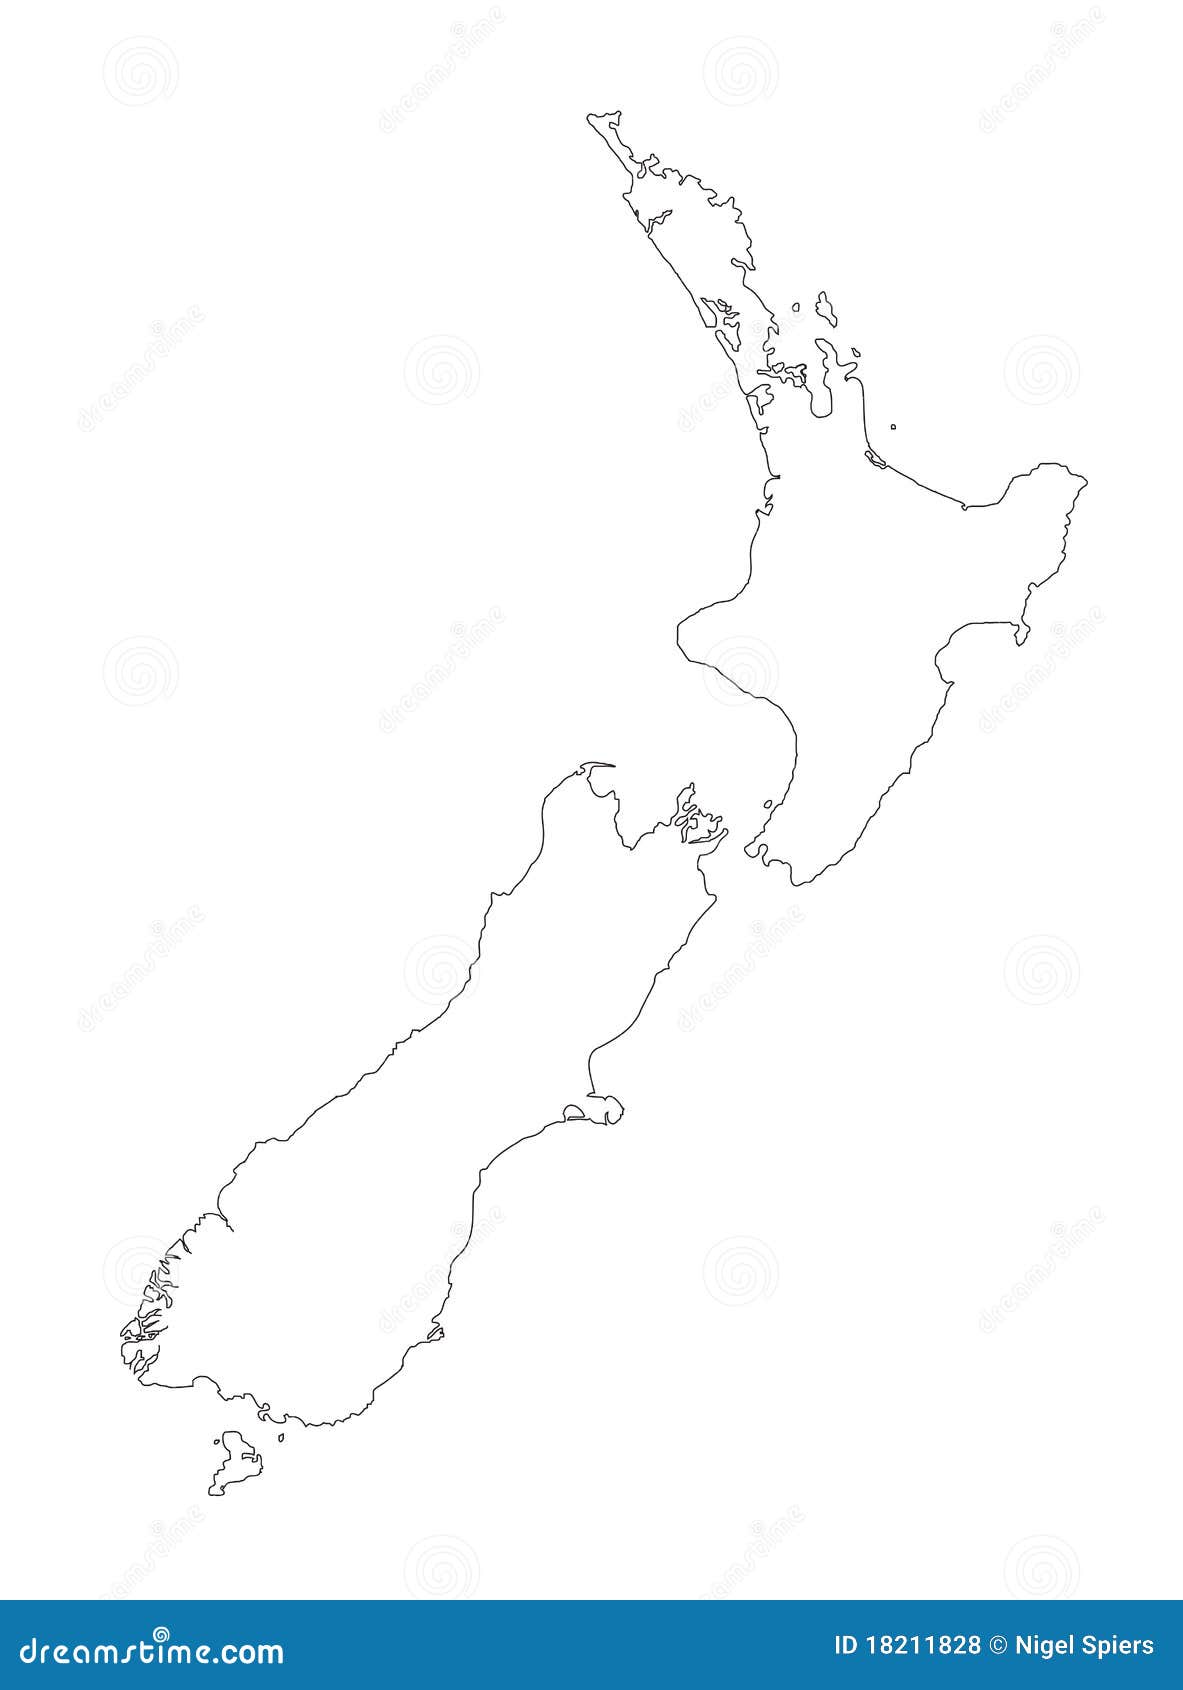 clipart map of new zealand - photo #10